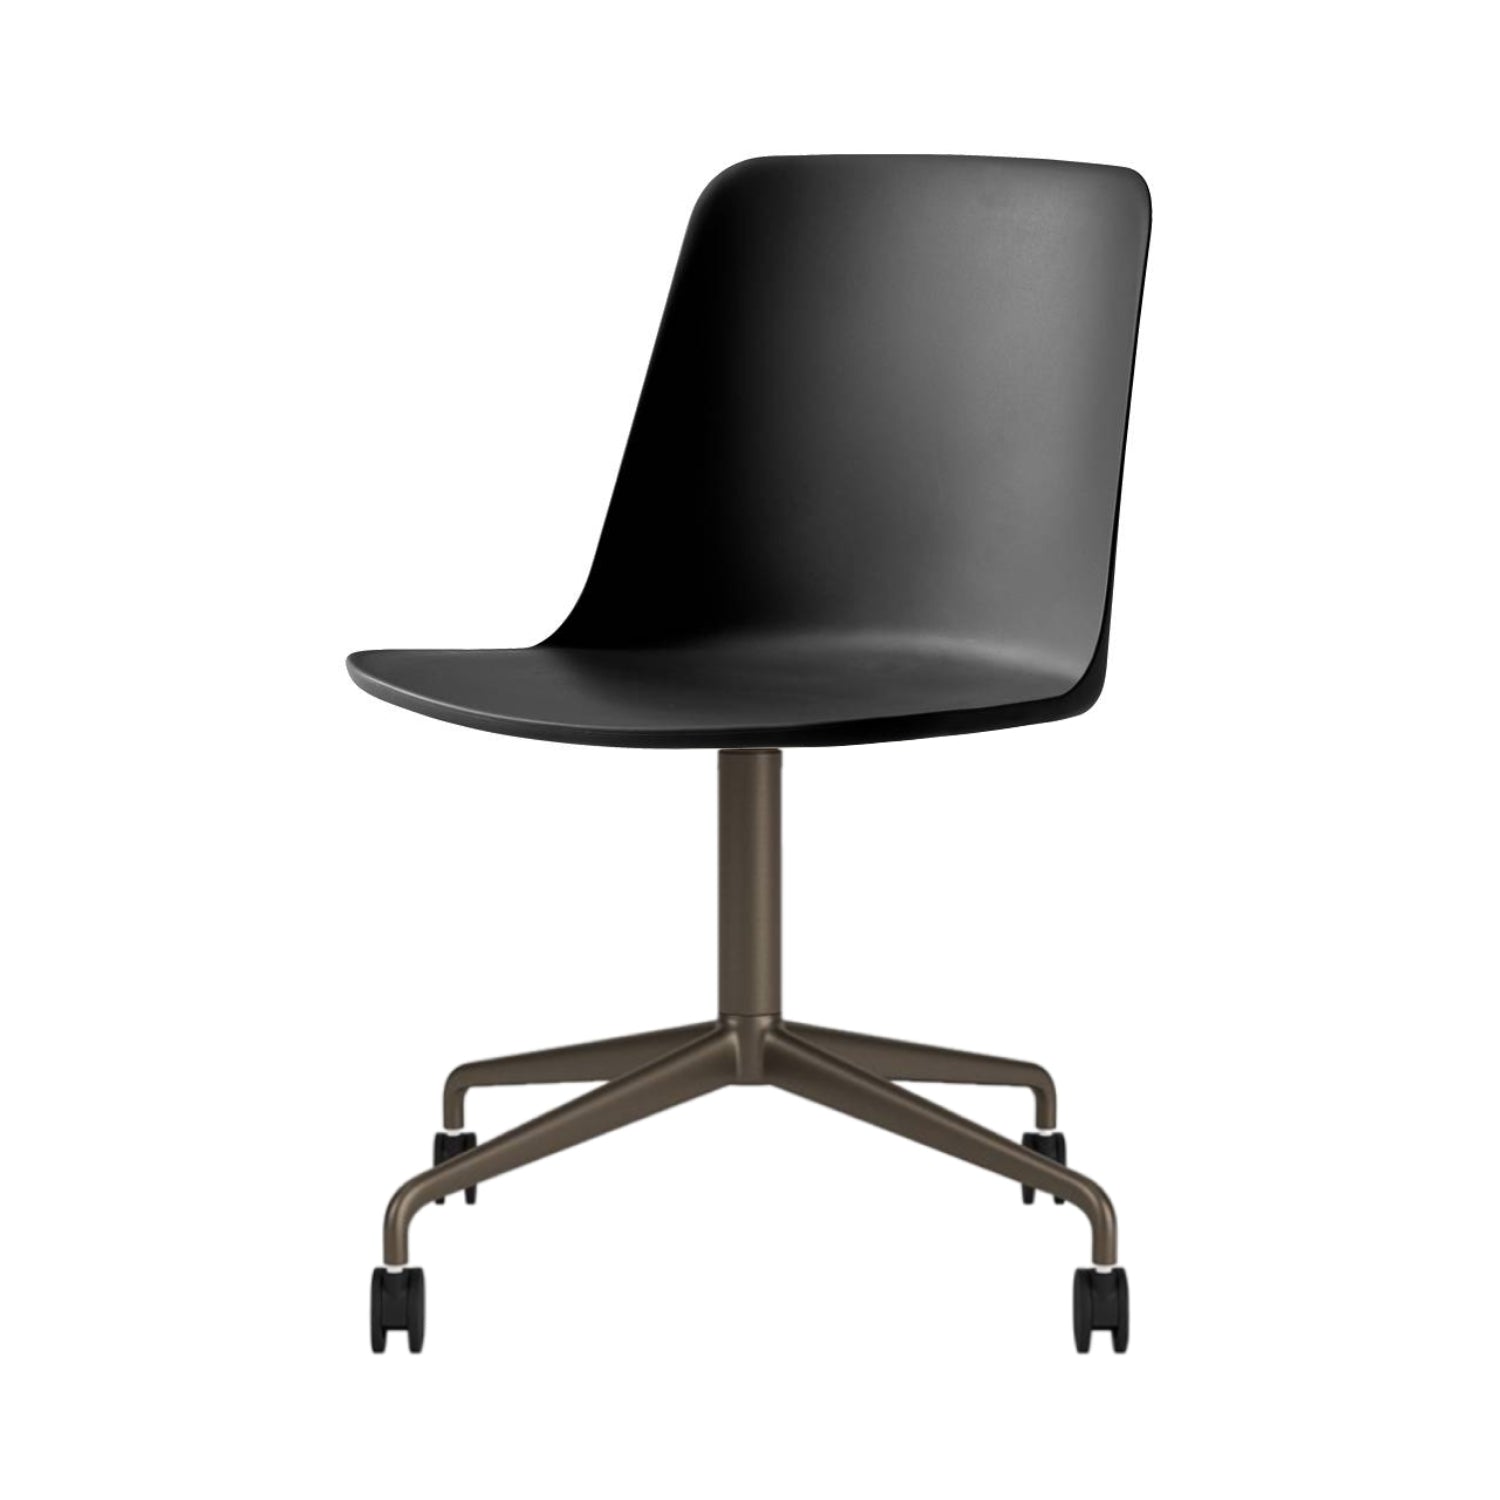 Rely Chair HW21: Black + Bronzed